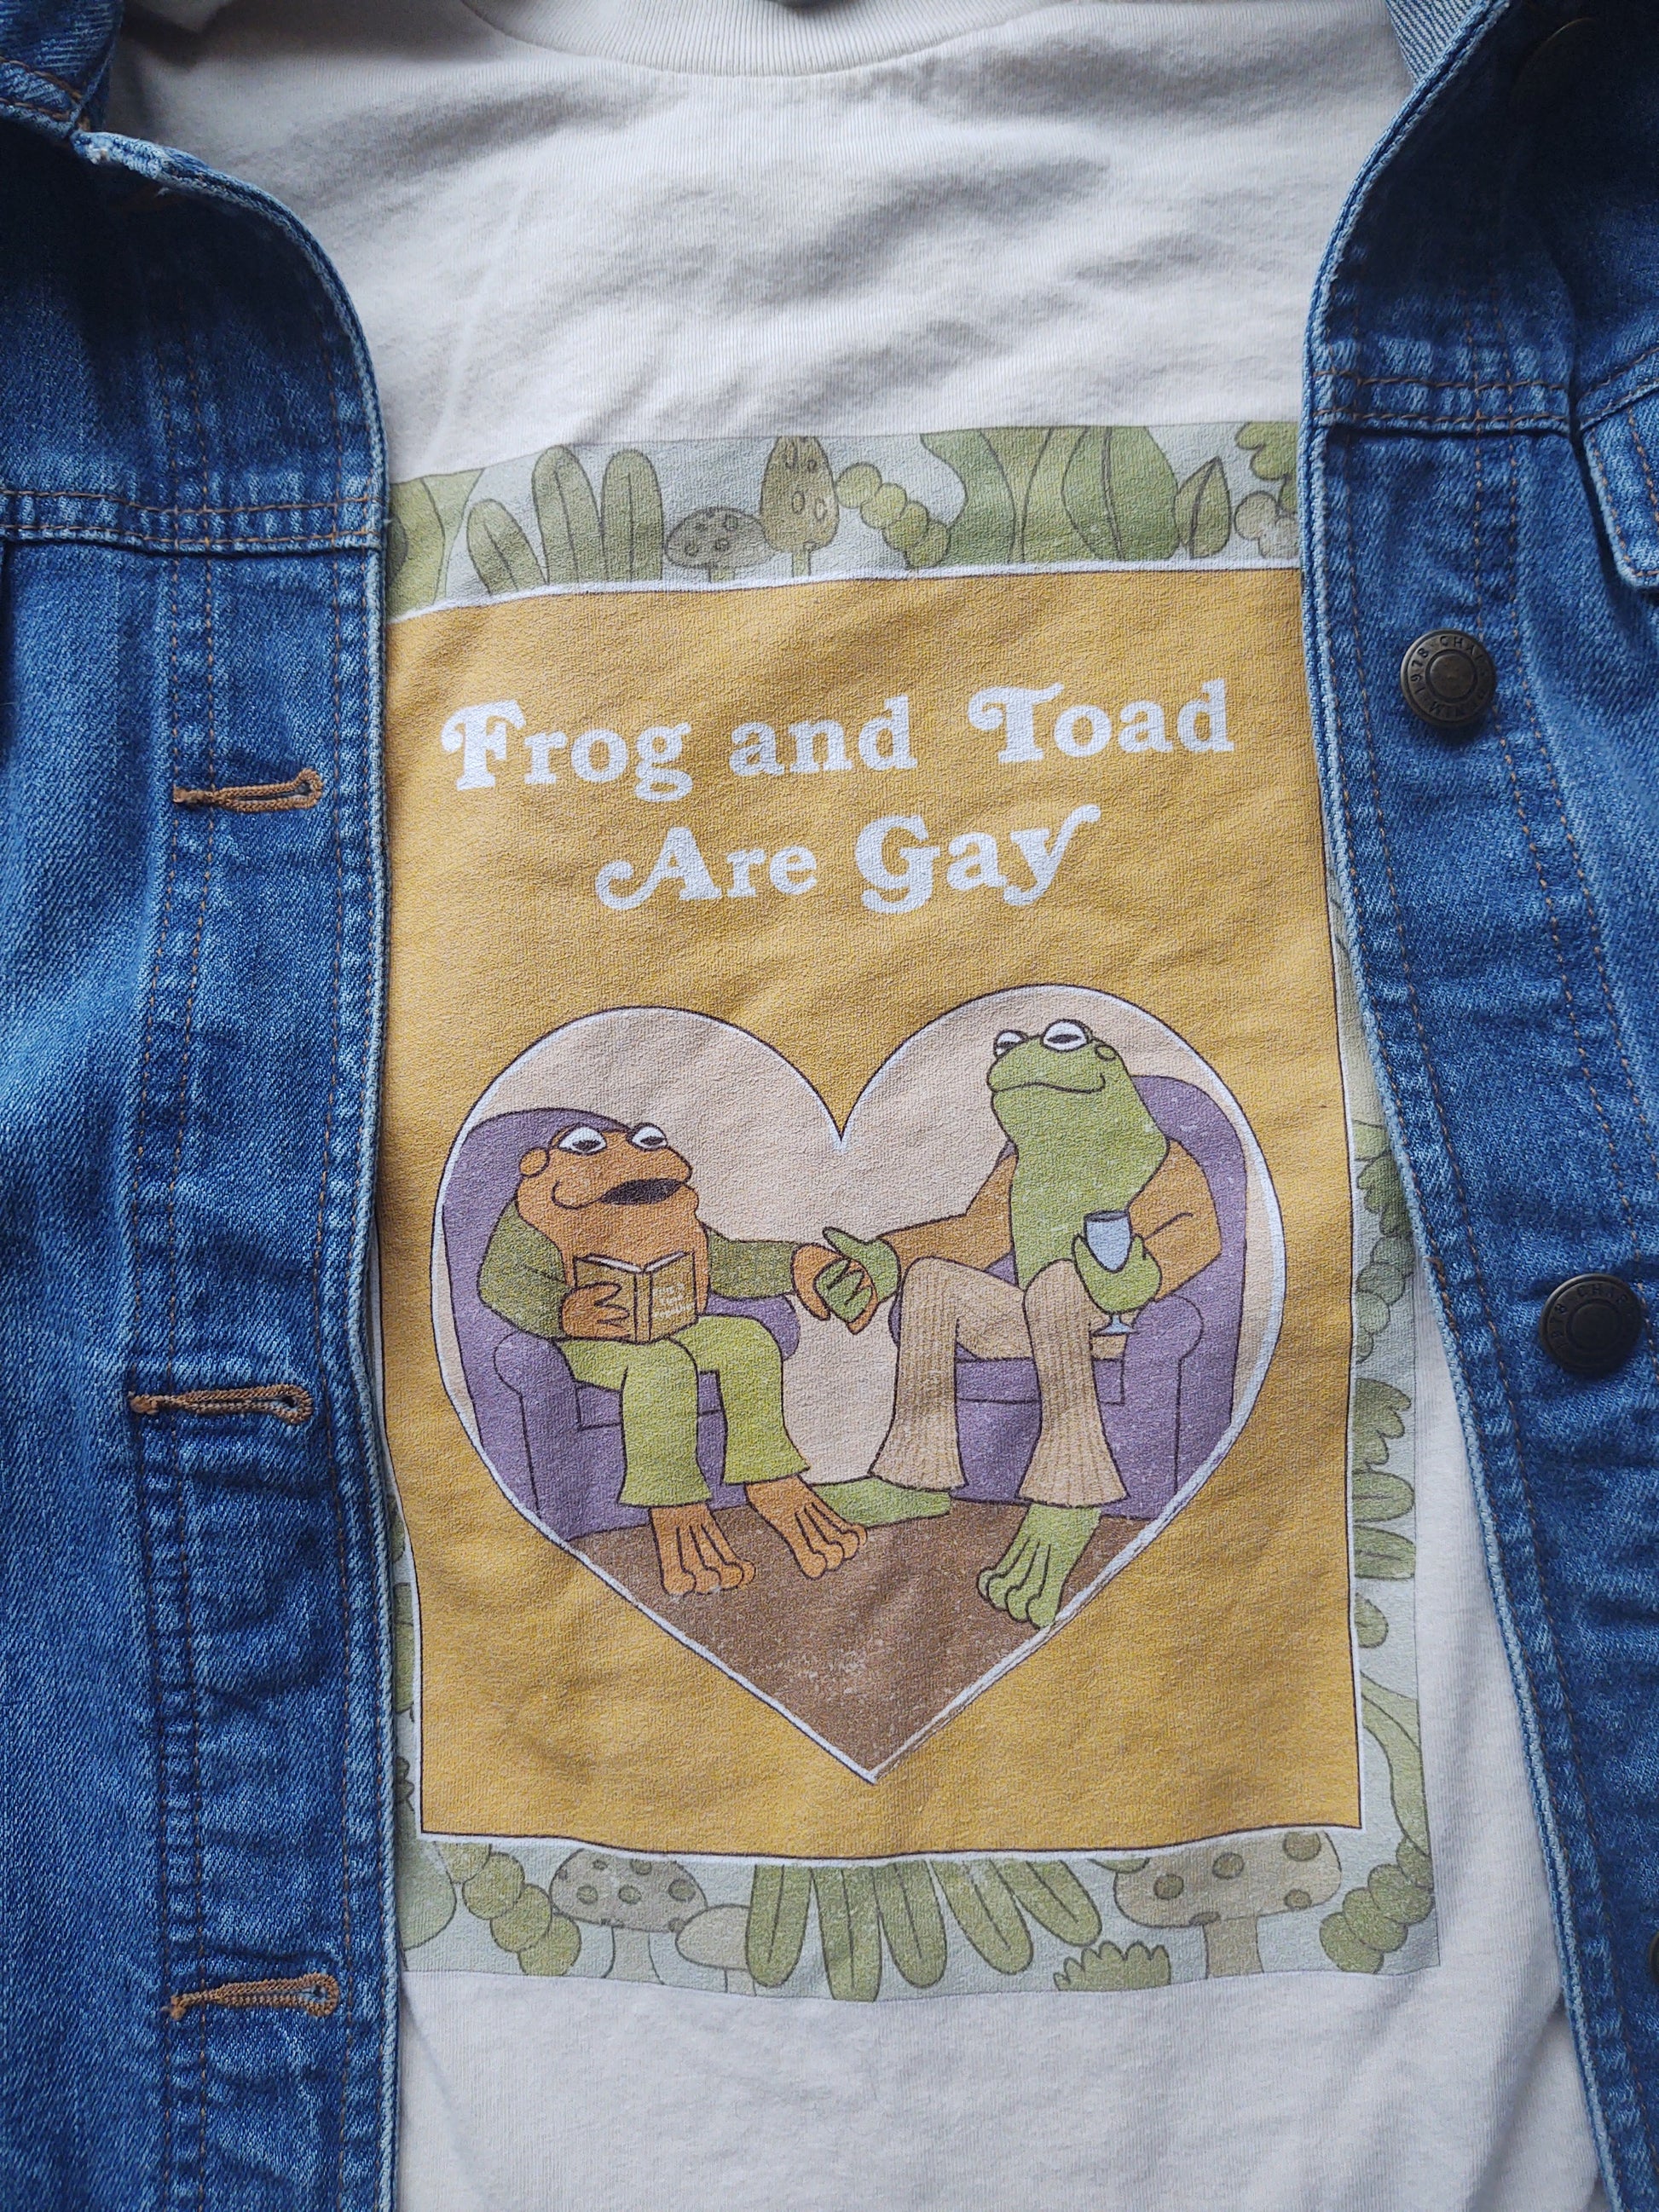 frog and toad shirt showing faux book cover with frog and toad holding hands with a denim jacket over